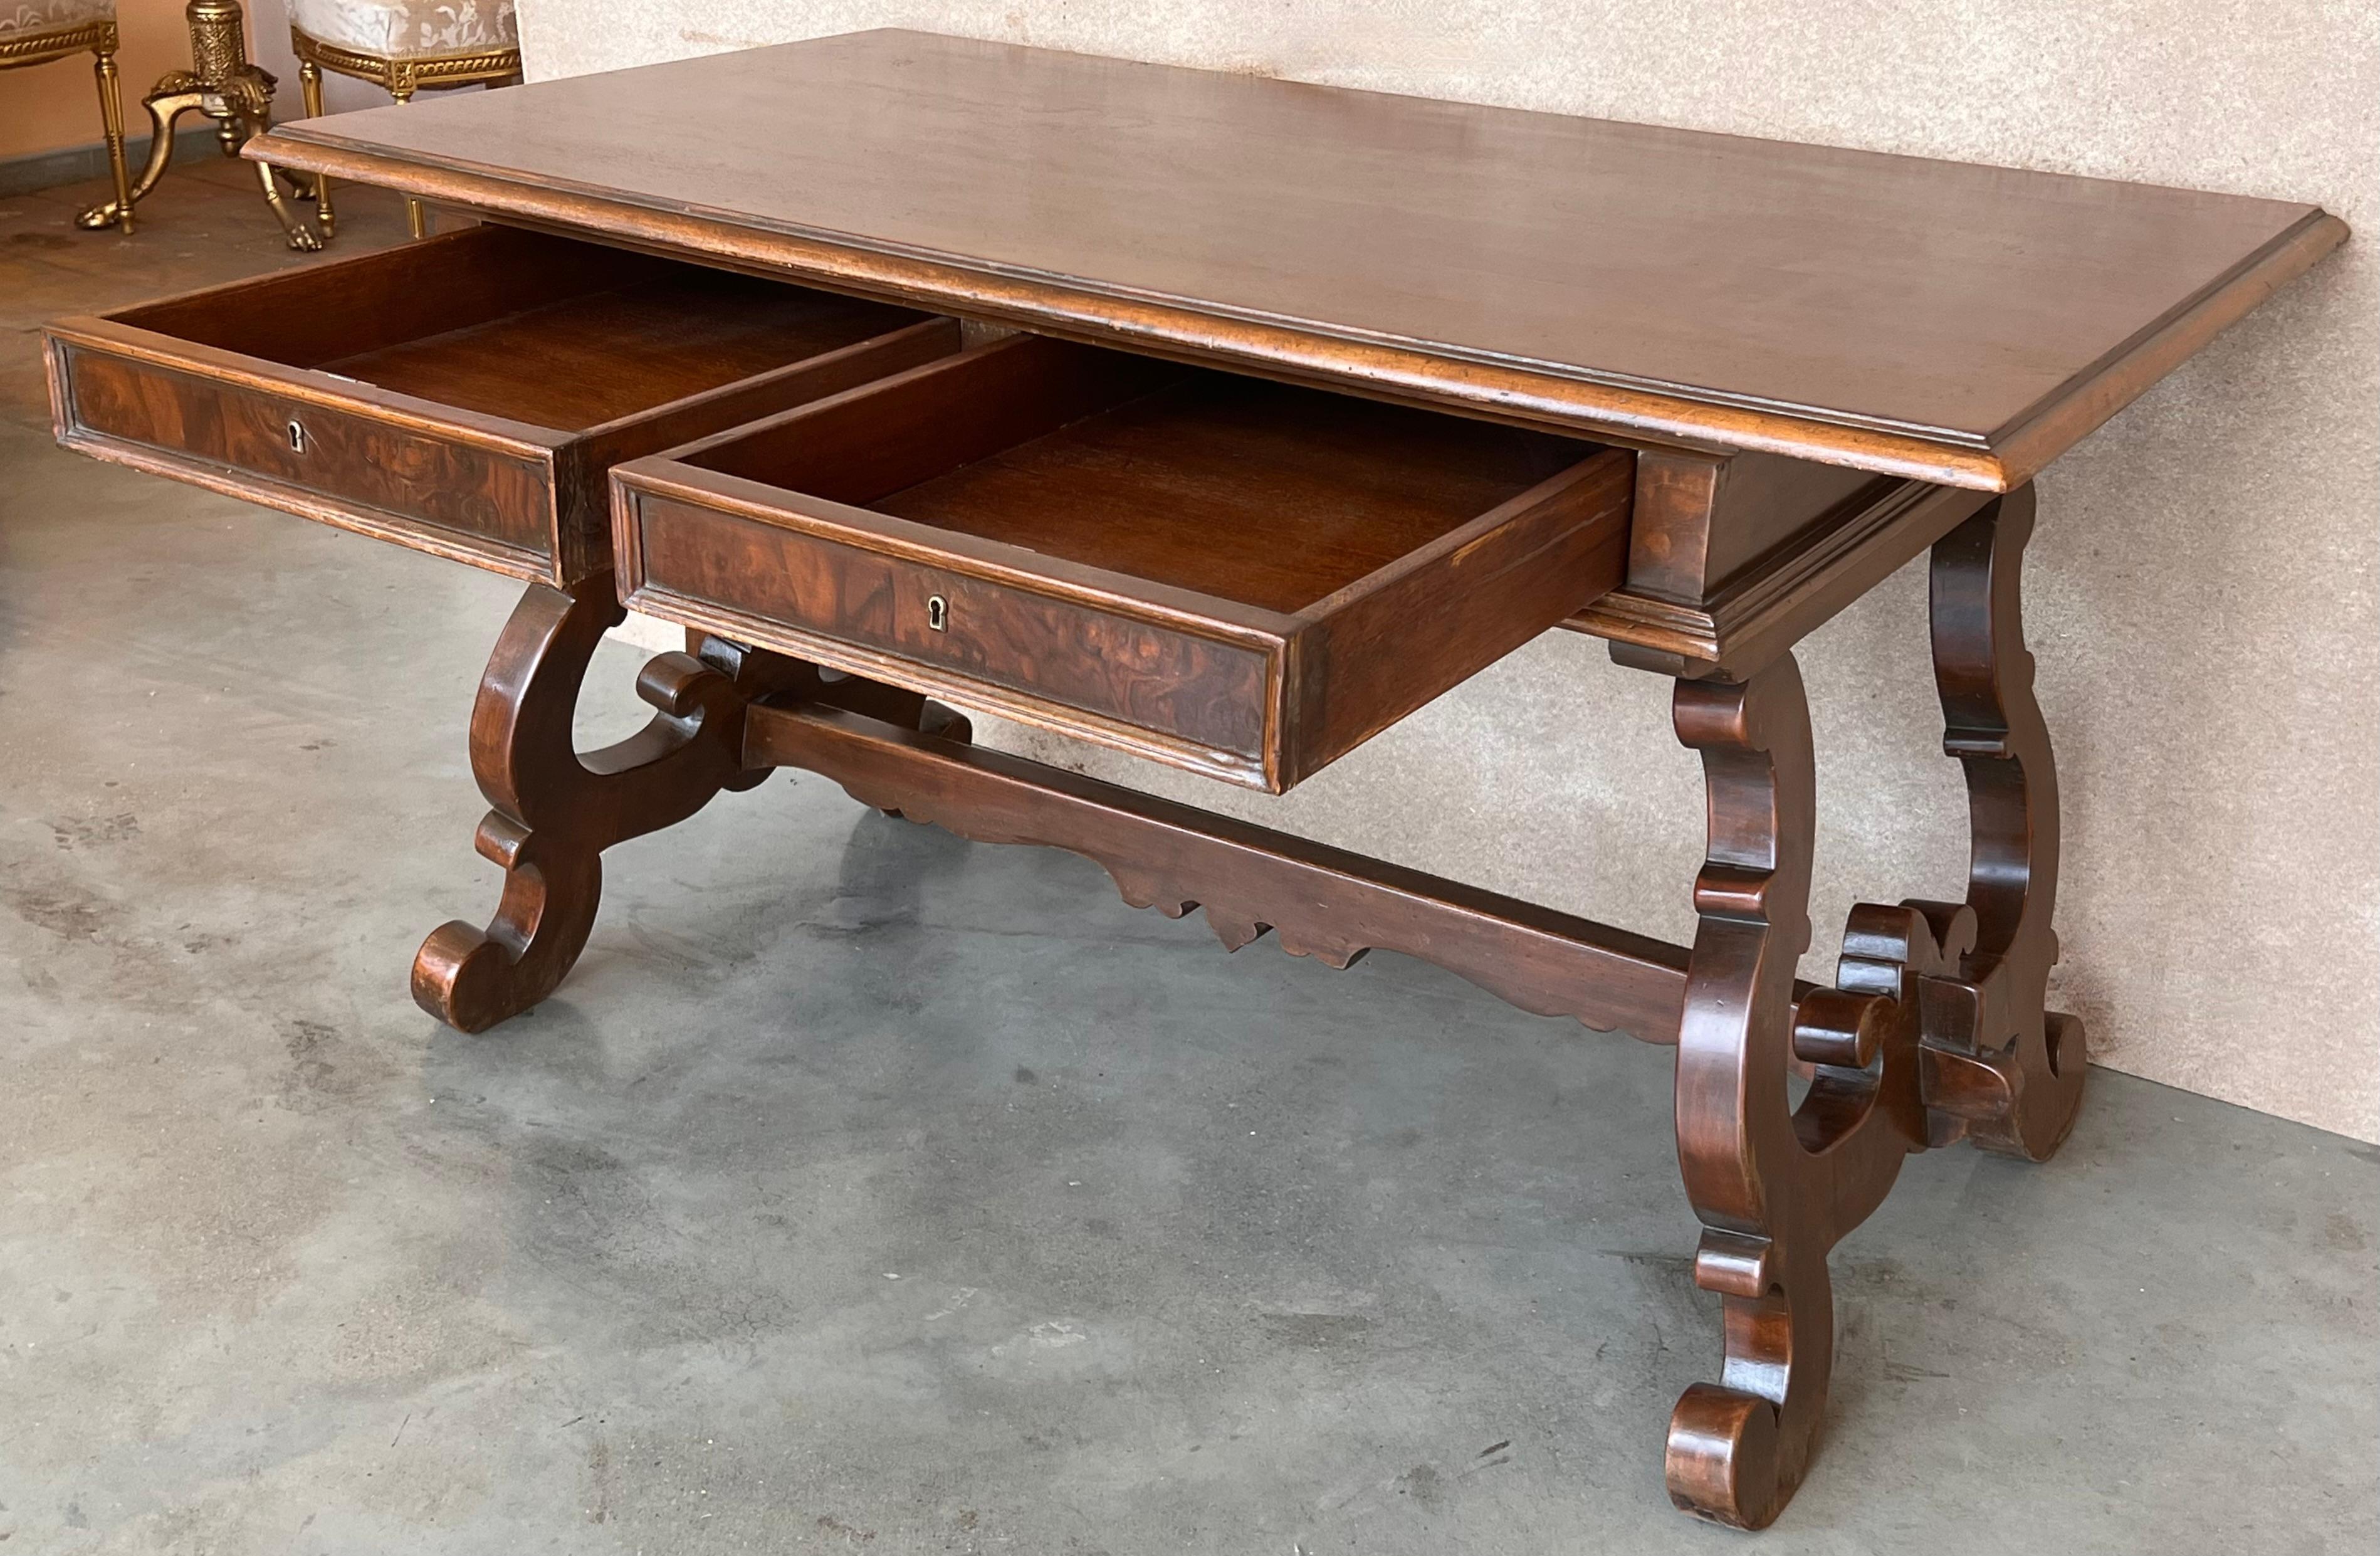 20th Century Solid Walnut Baroque Lyre-Leg Trestle Refectory Desk Writing Table For Sale 2